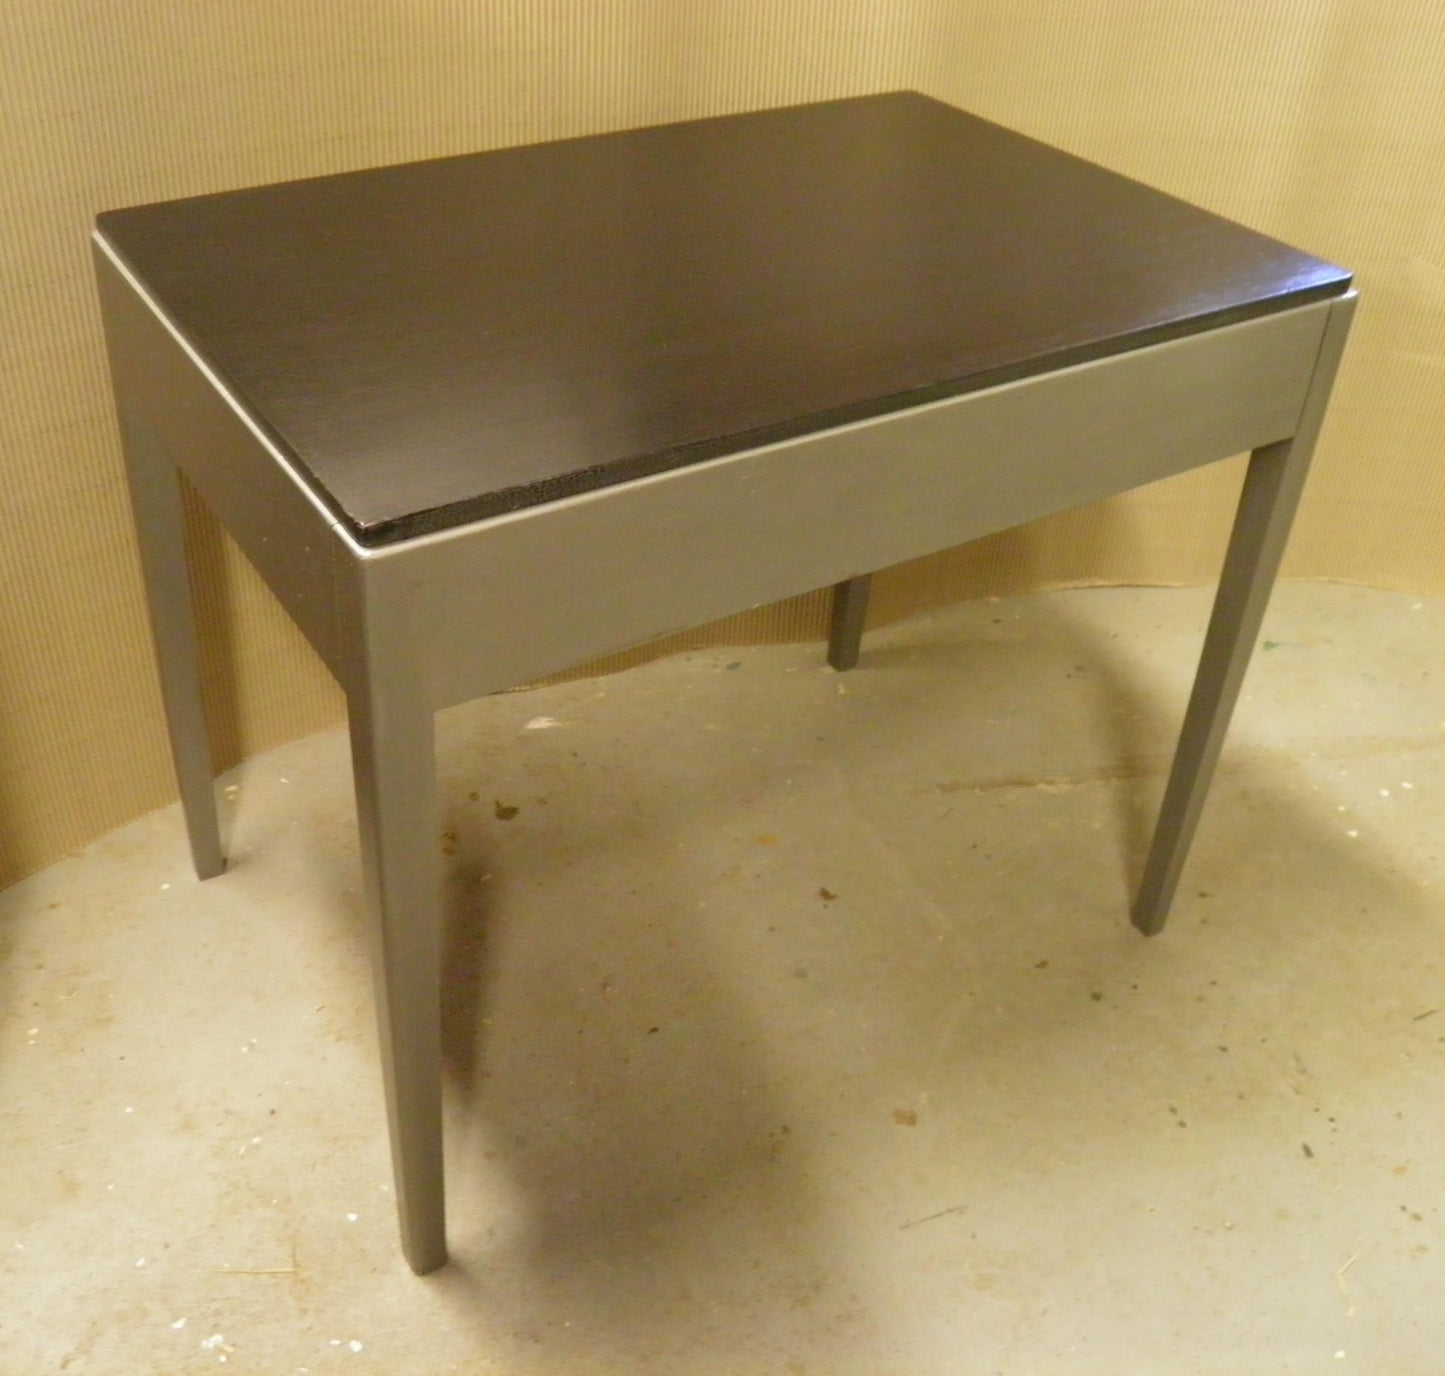 Retro Industrial Style Writing Table / Desk